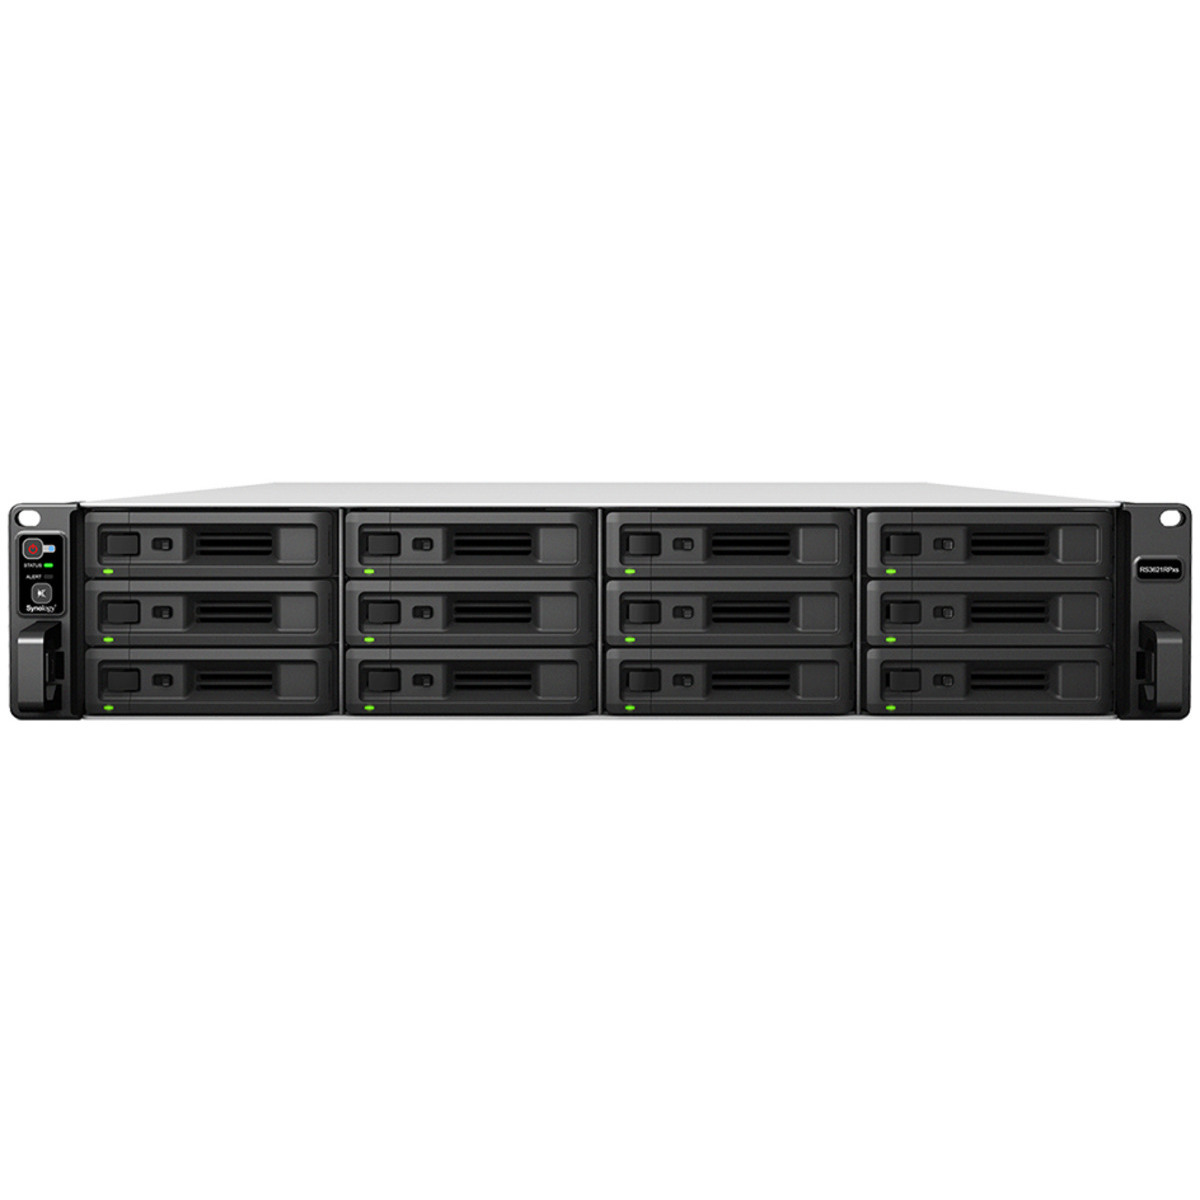 Synology RackStation RS3621RPxs 54tb 12-Bay RackMount Large Business / Enterprise NAS - Network Attached Storage Device 9x6tb Synology Plus Series HAT3300-6T 3.5 5400rmp SATA 6Gb/s HDD NAS Class Drives Installed - Burn-In Tested RackStation RS3621RPxs